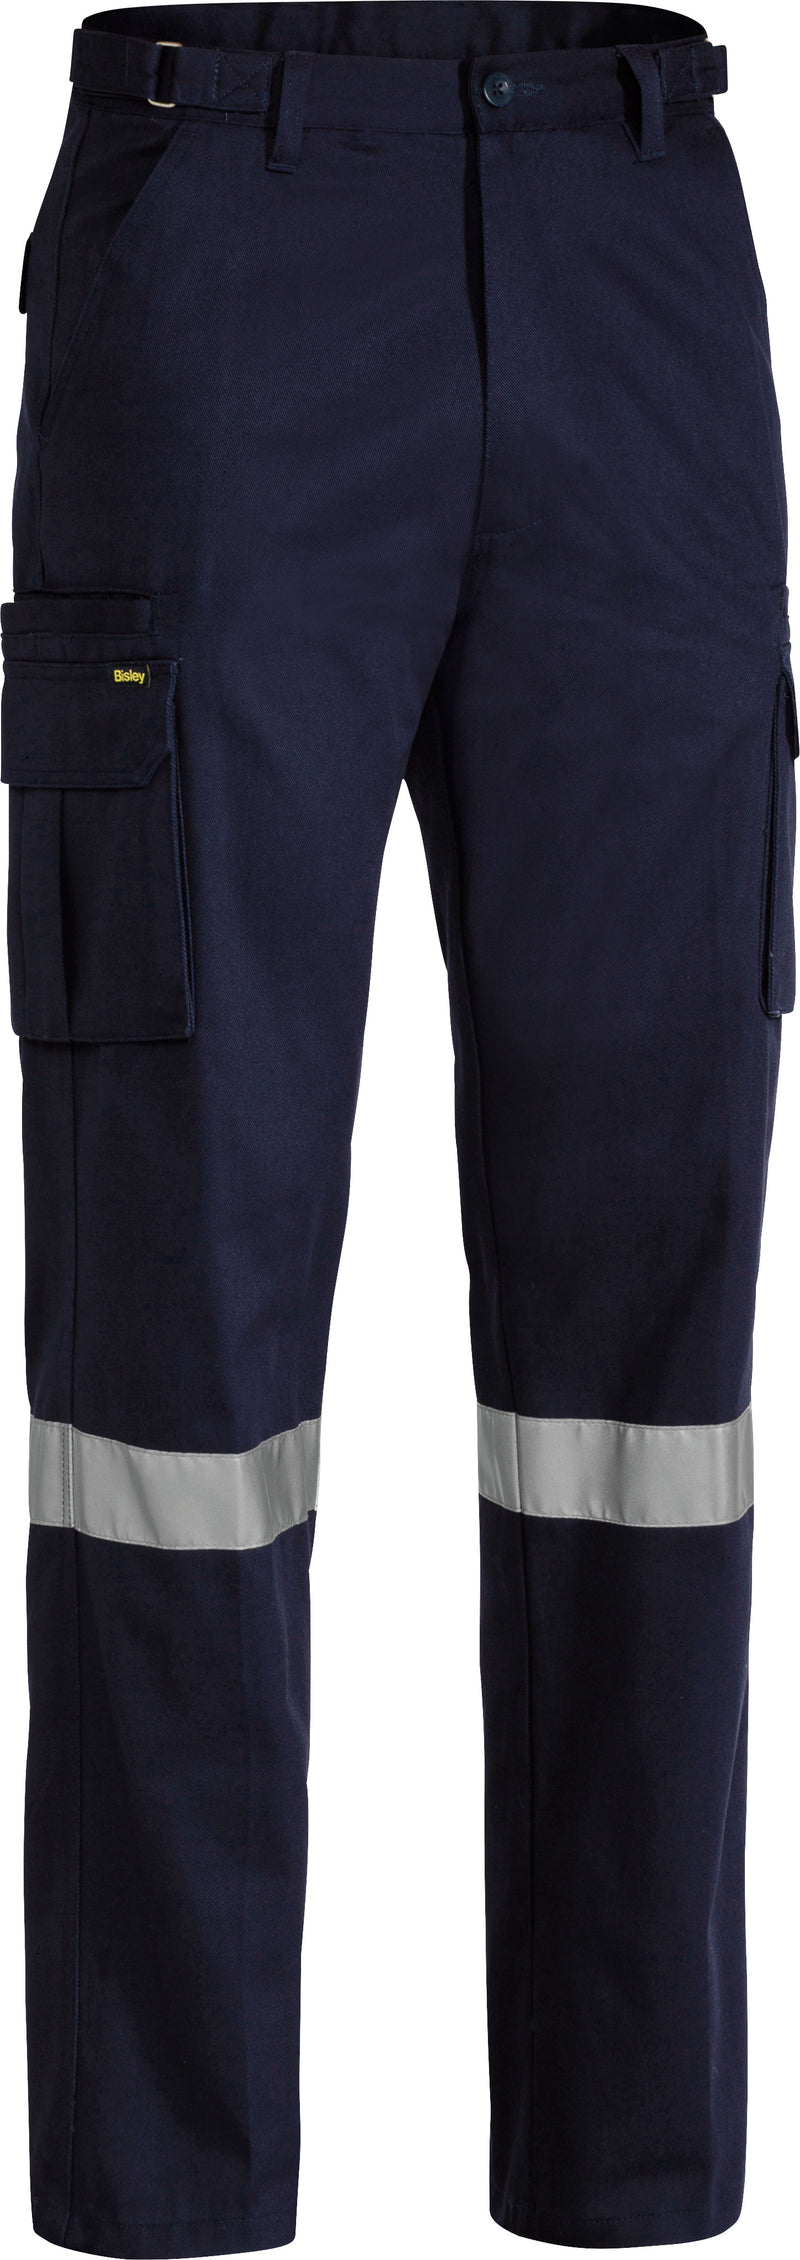 Load image into Gallery viewer, Wholesale BPC6007T Bisley 8 Pocket Cargo Pant 3M Reflective Tape - Regular Printed or Blank
